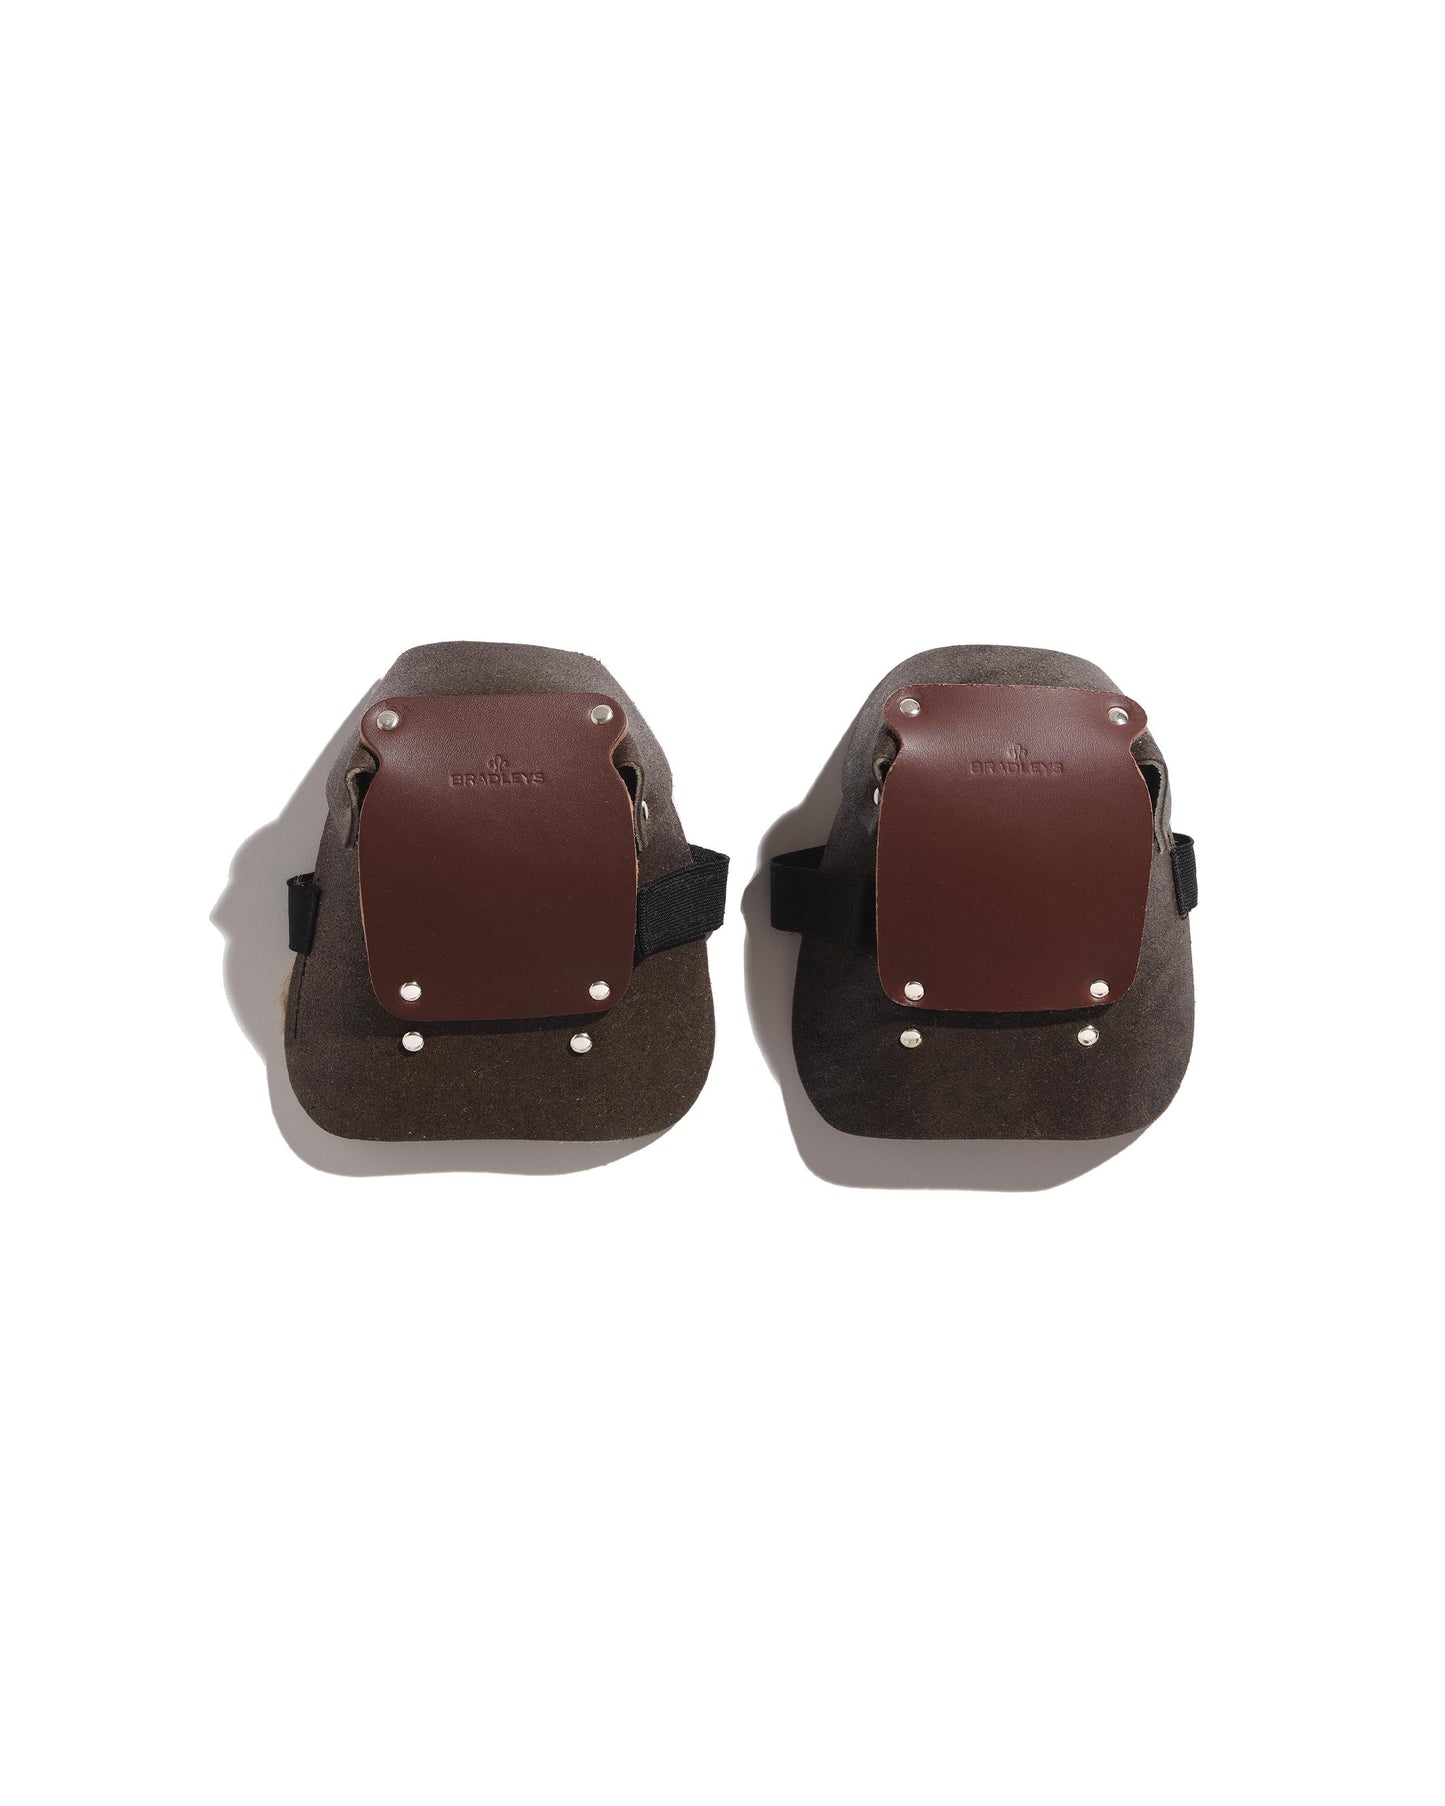 Thick leather knee pads